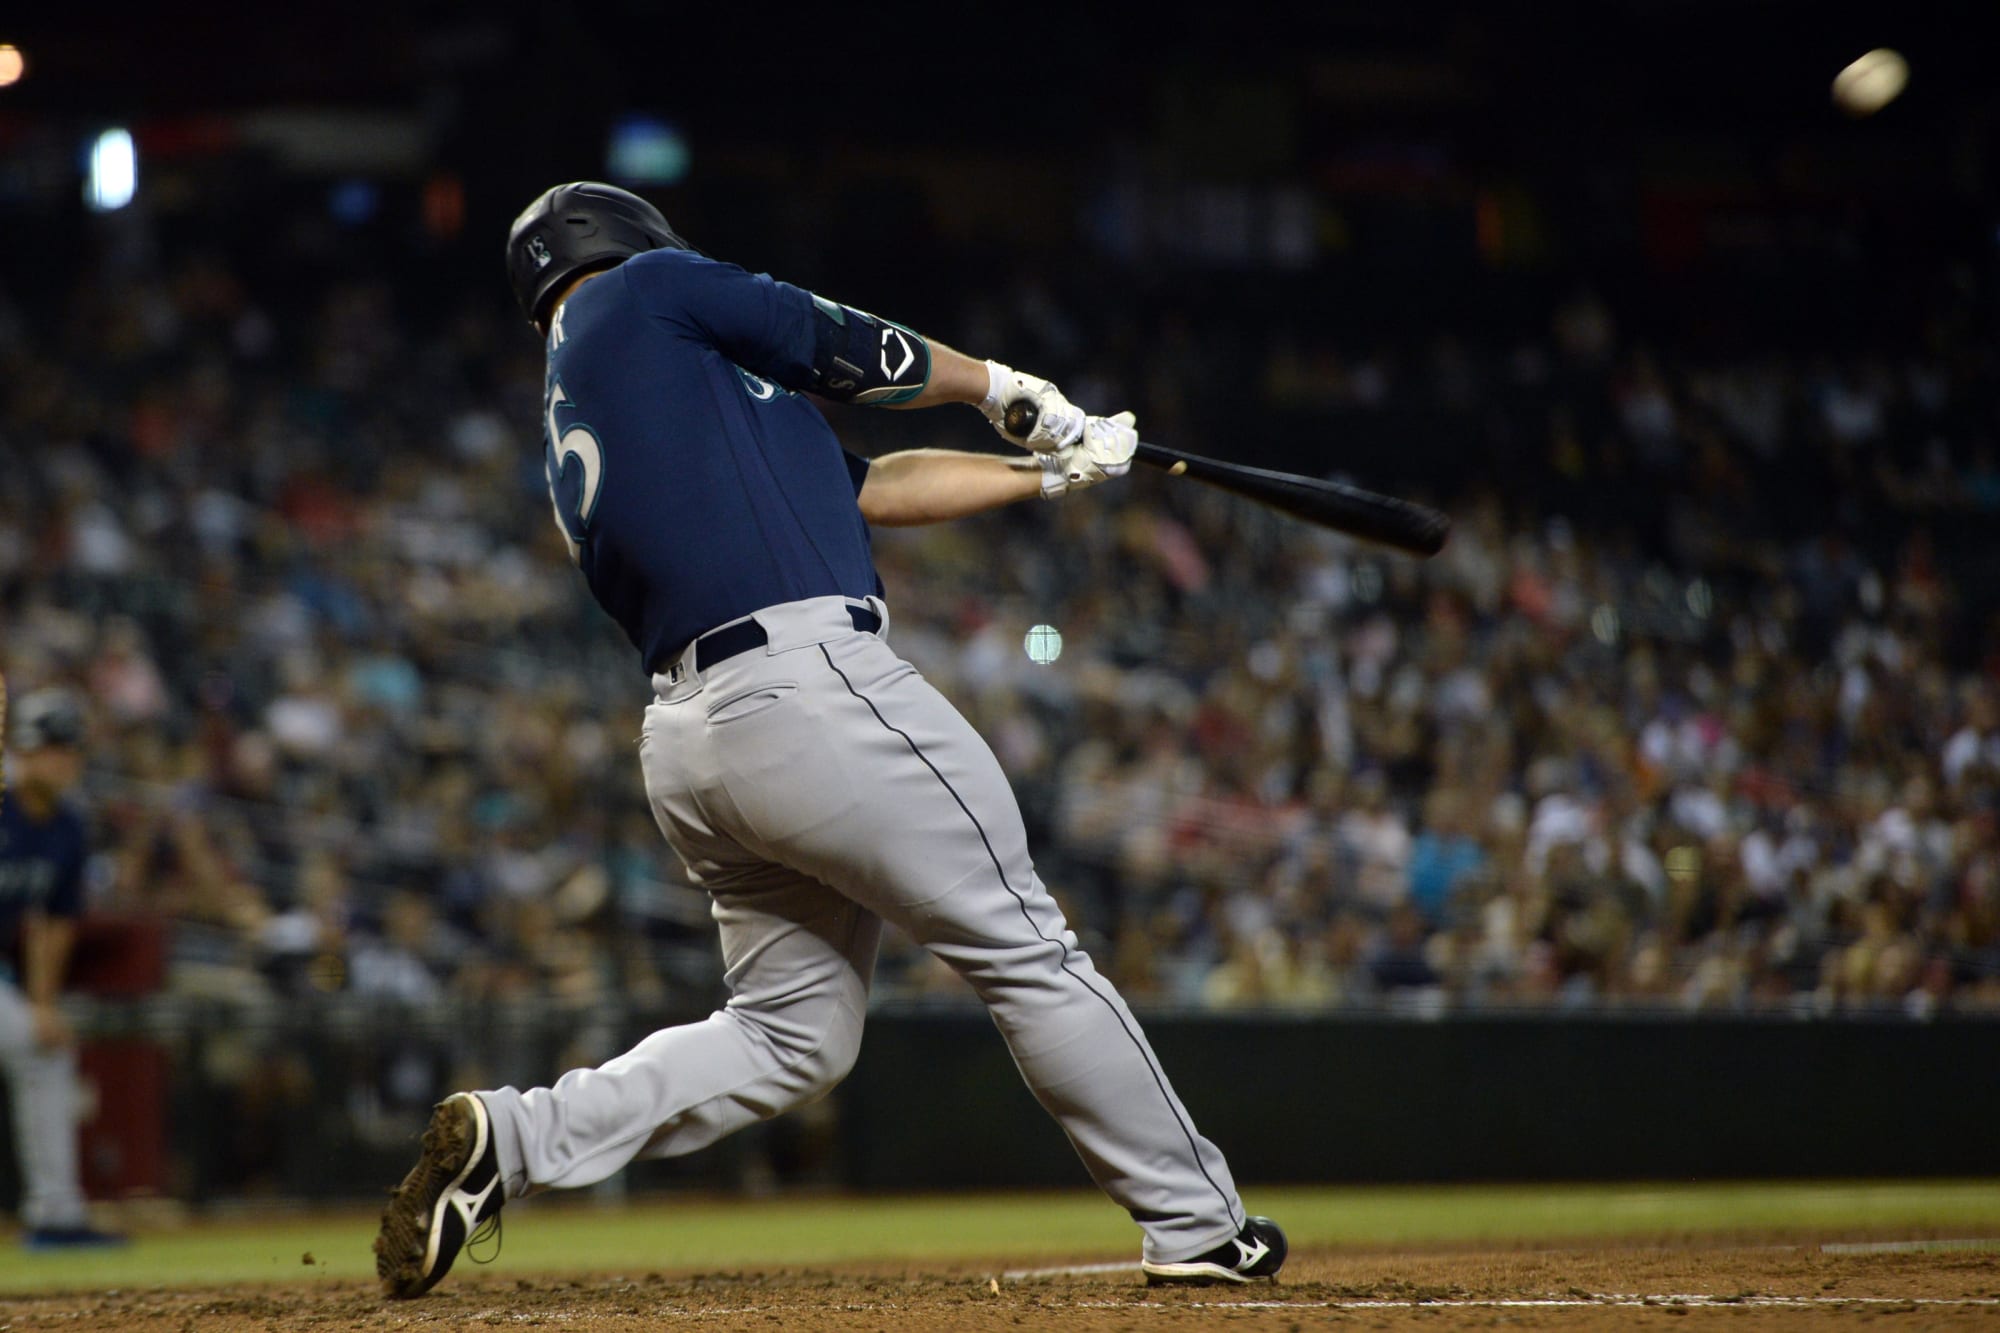 Mariners third baseman Kyle Seager given standing ovation in